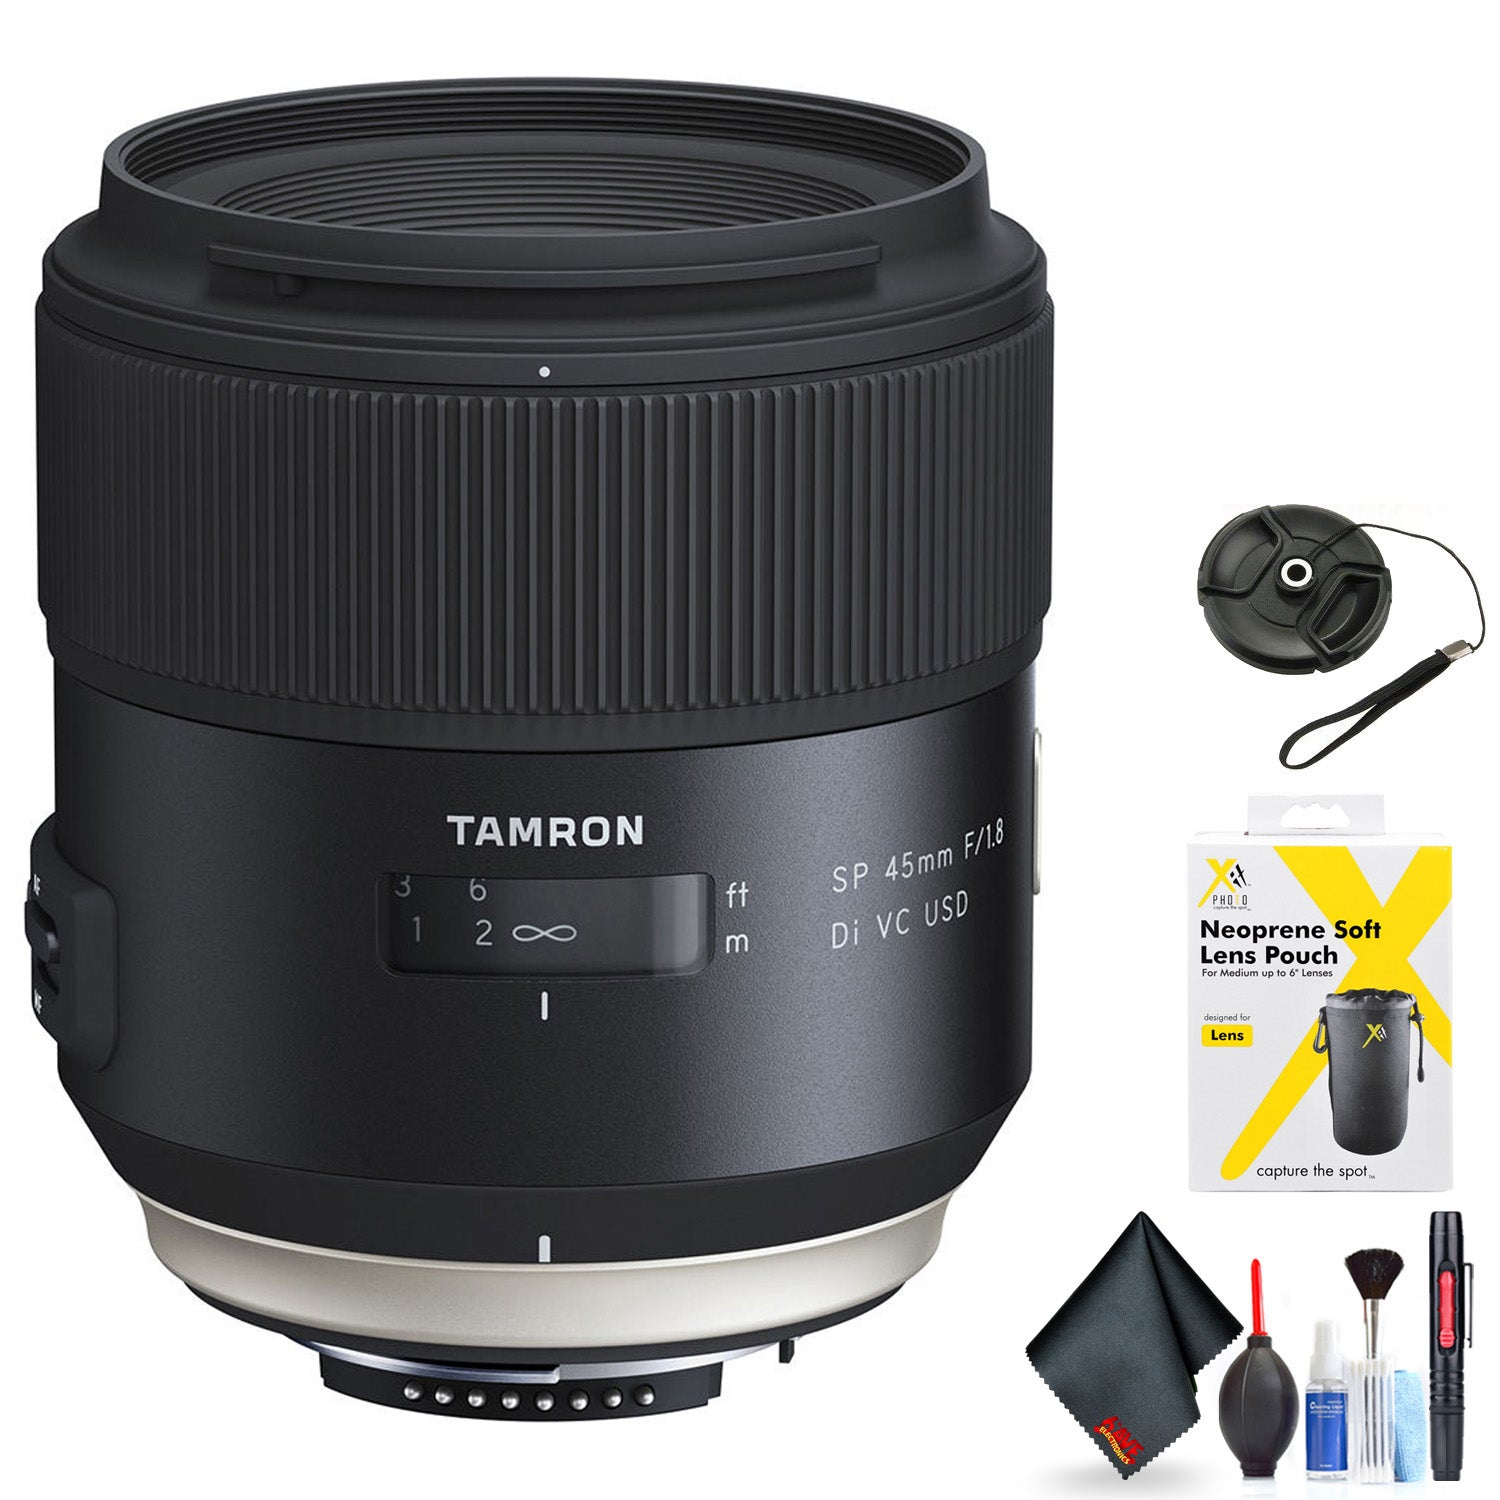 Tamron SP 45mm f/1.8 Di VC USD Lens for Nikon F for Nikon F Mount + Accessories (International Model with 2 Year Warrant